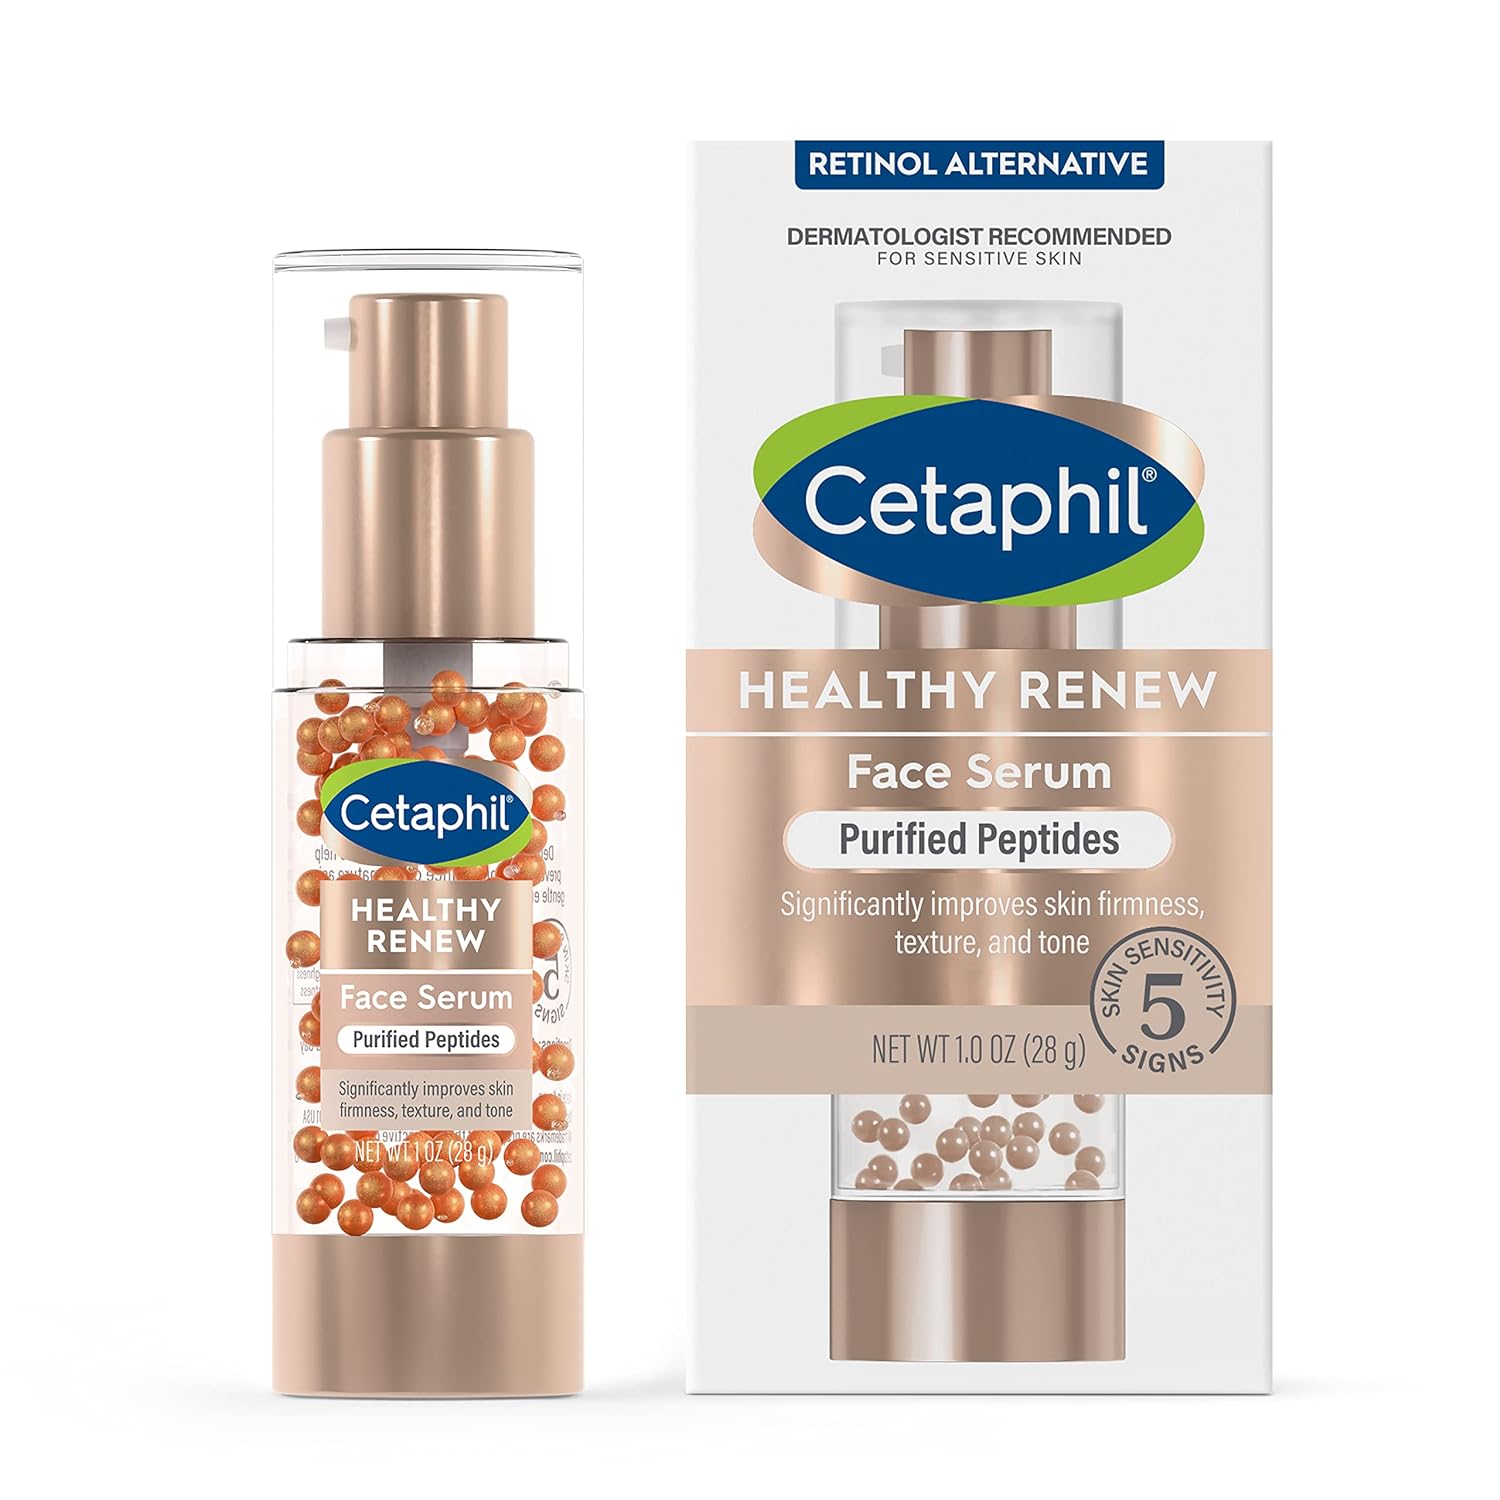 Cetaphil Healthy Renew Anti Aging Face Serum 1 , Retinol Alternative Serum for Face with Niacinamide & Peptides, Skincare for Sensitive Skin with Vitamin B Complex, Fragrance Free